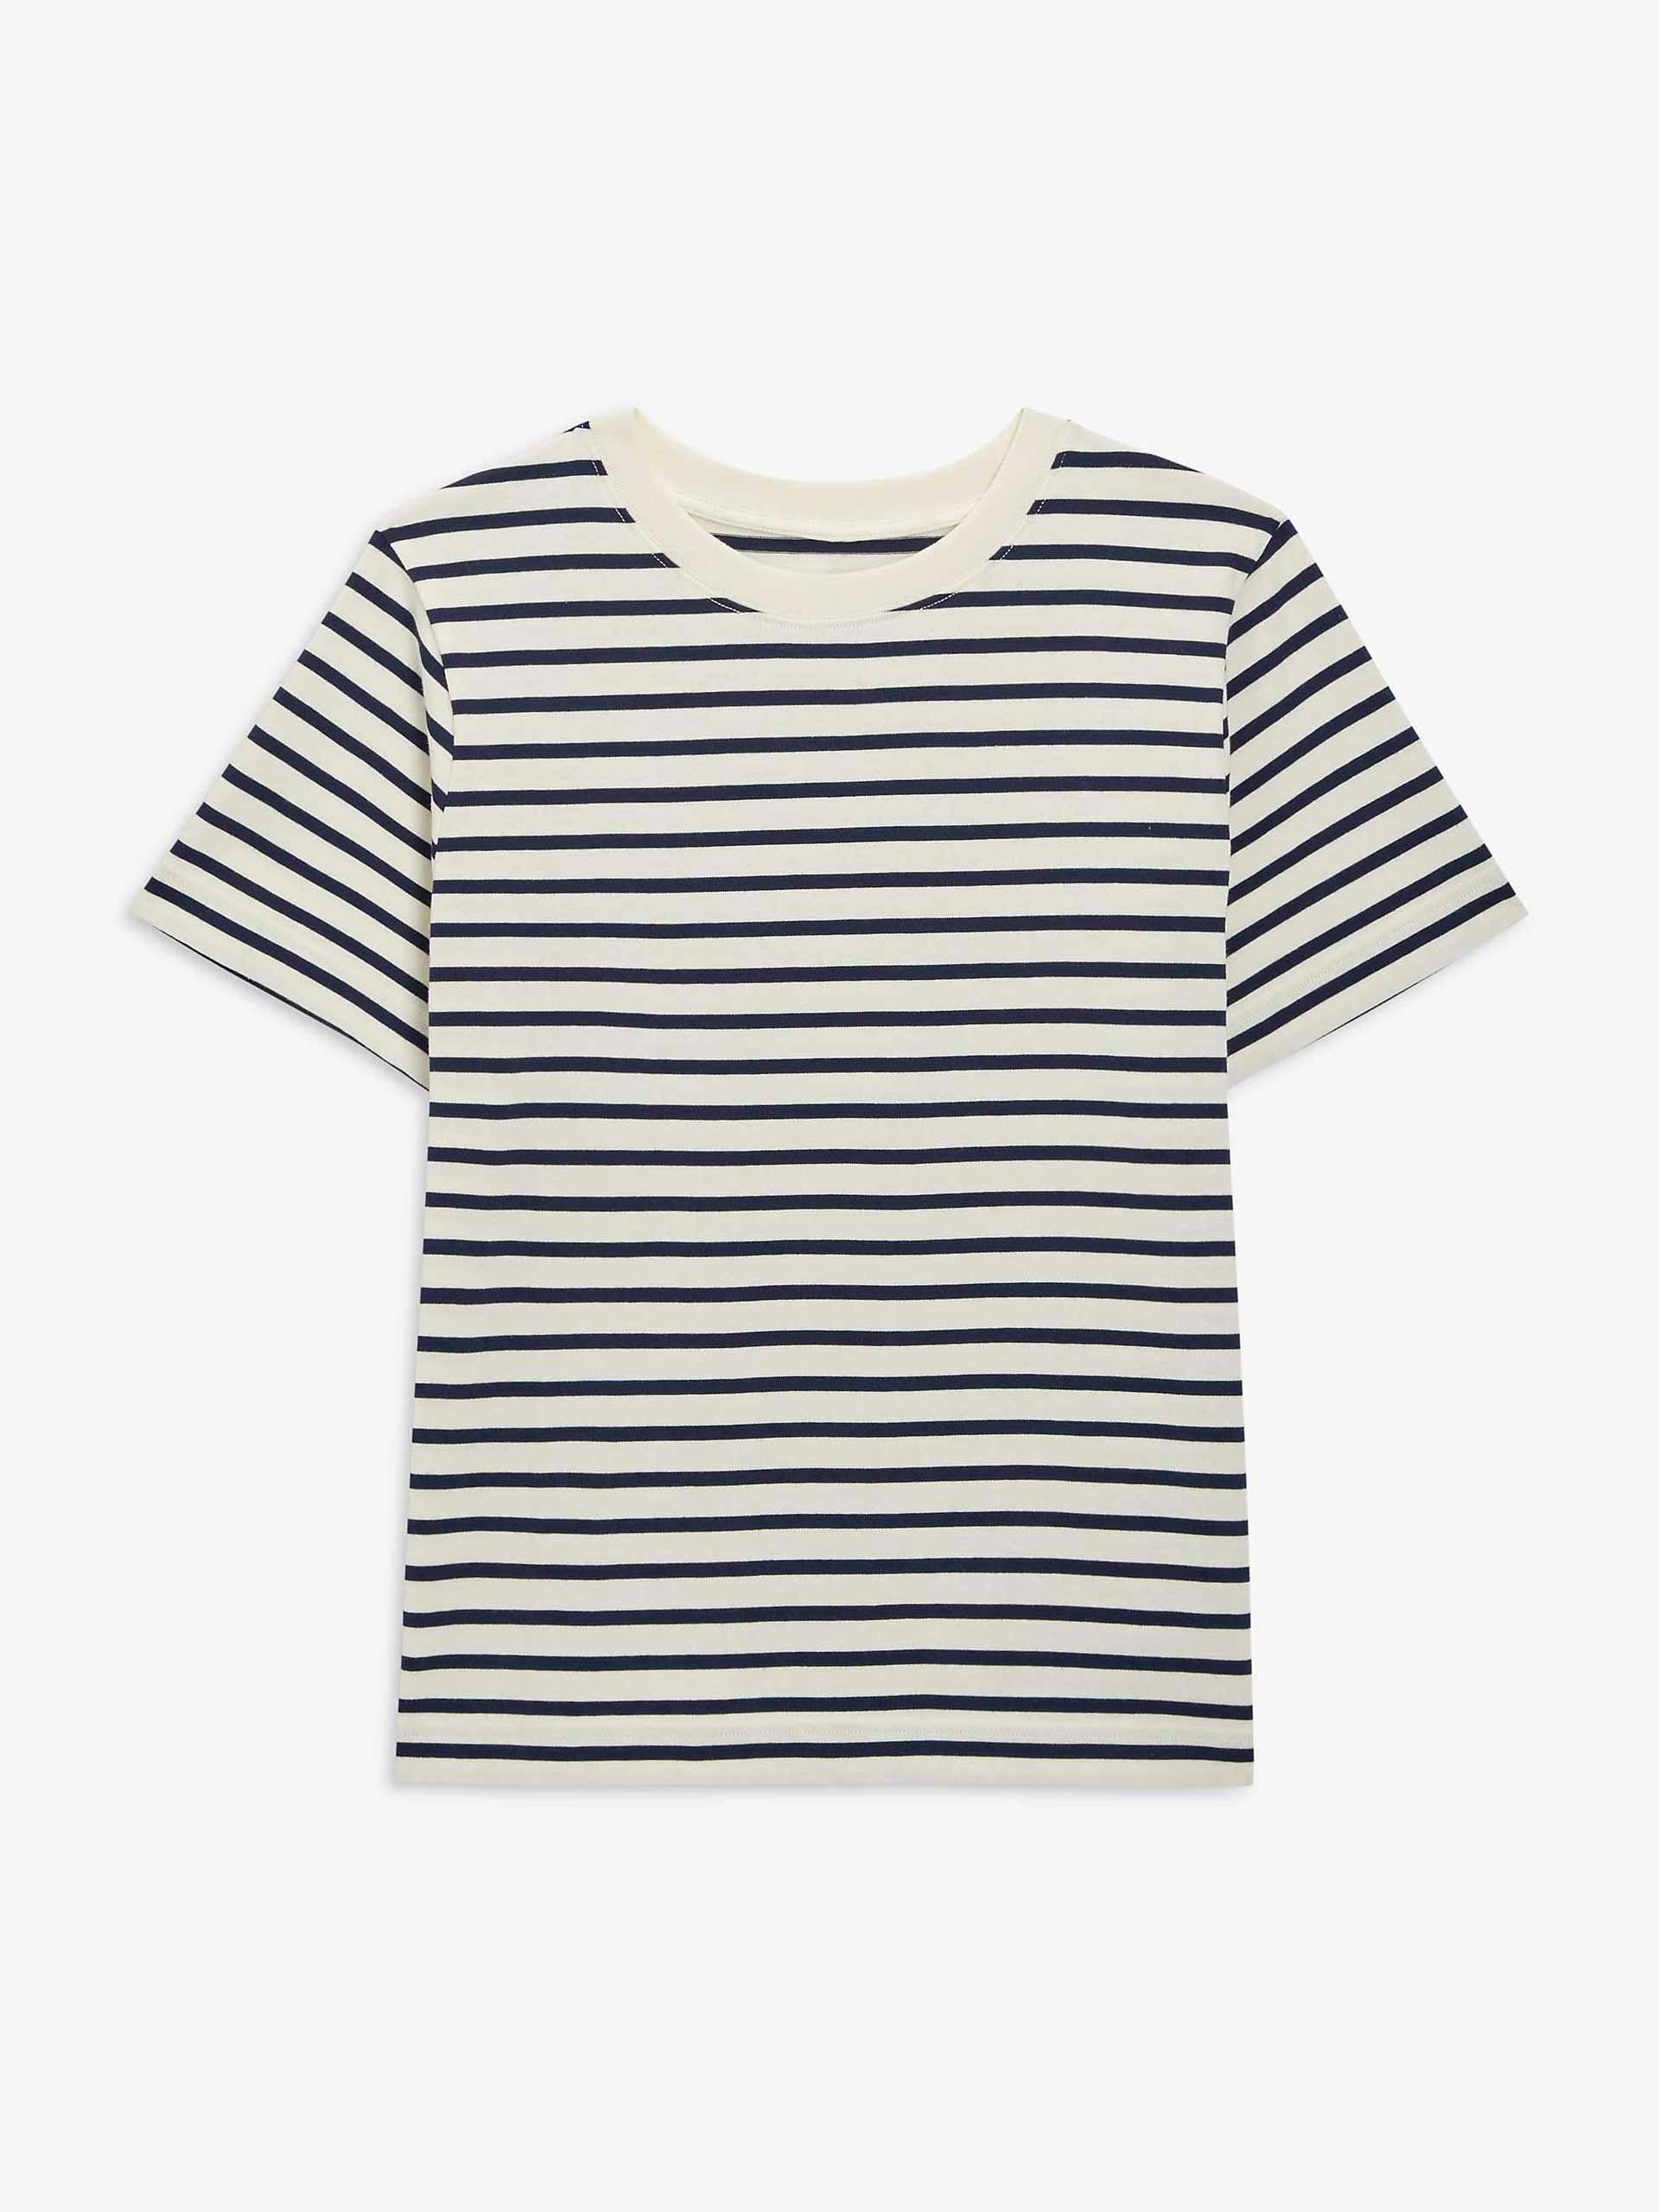 Navy and white striped t-shirt